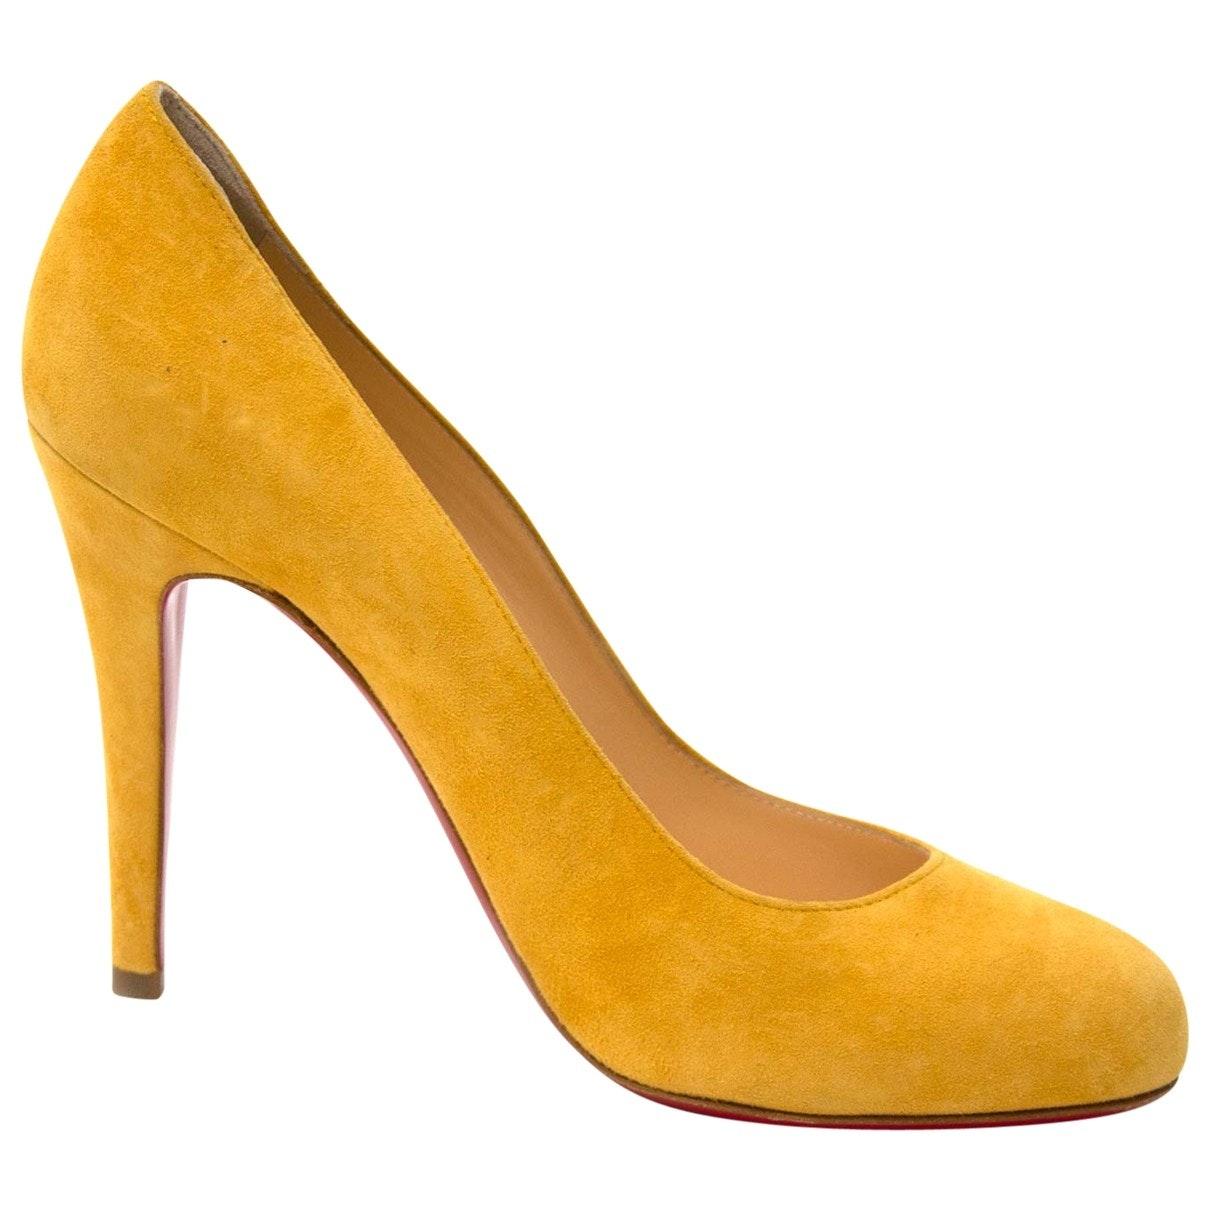 Christian Louboutin Suede Heels in Yellow - Lyst